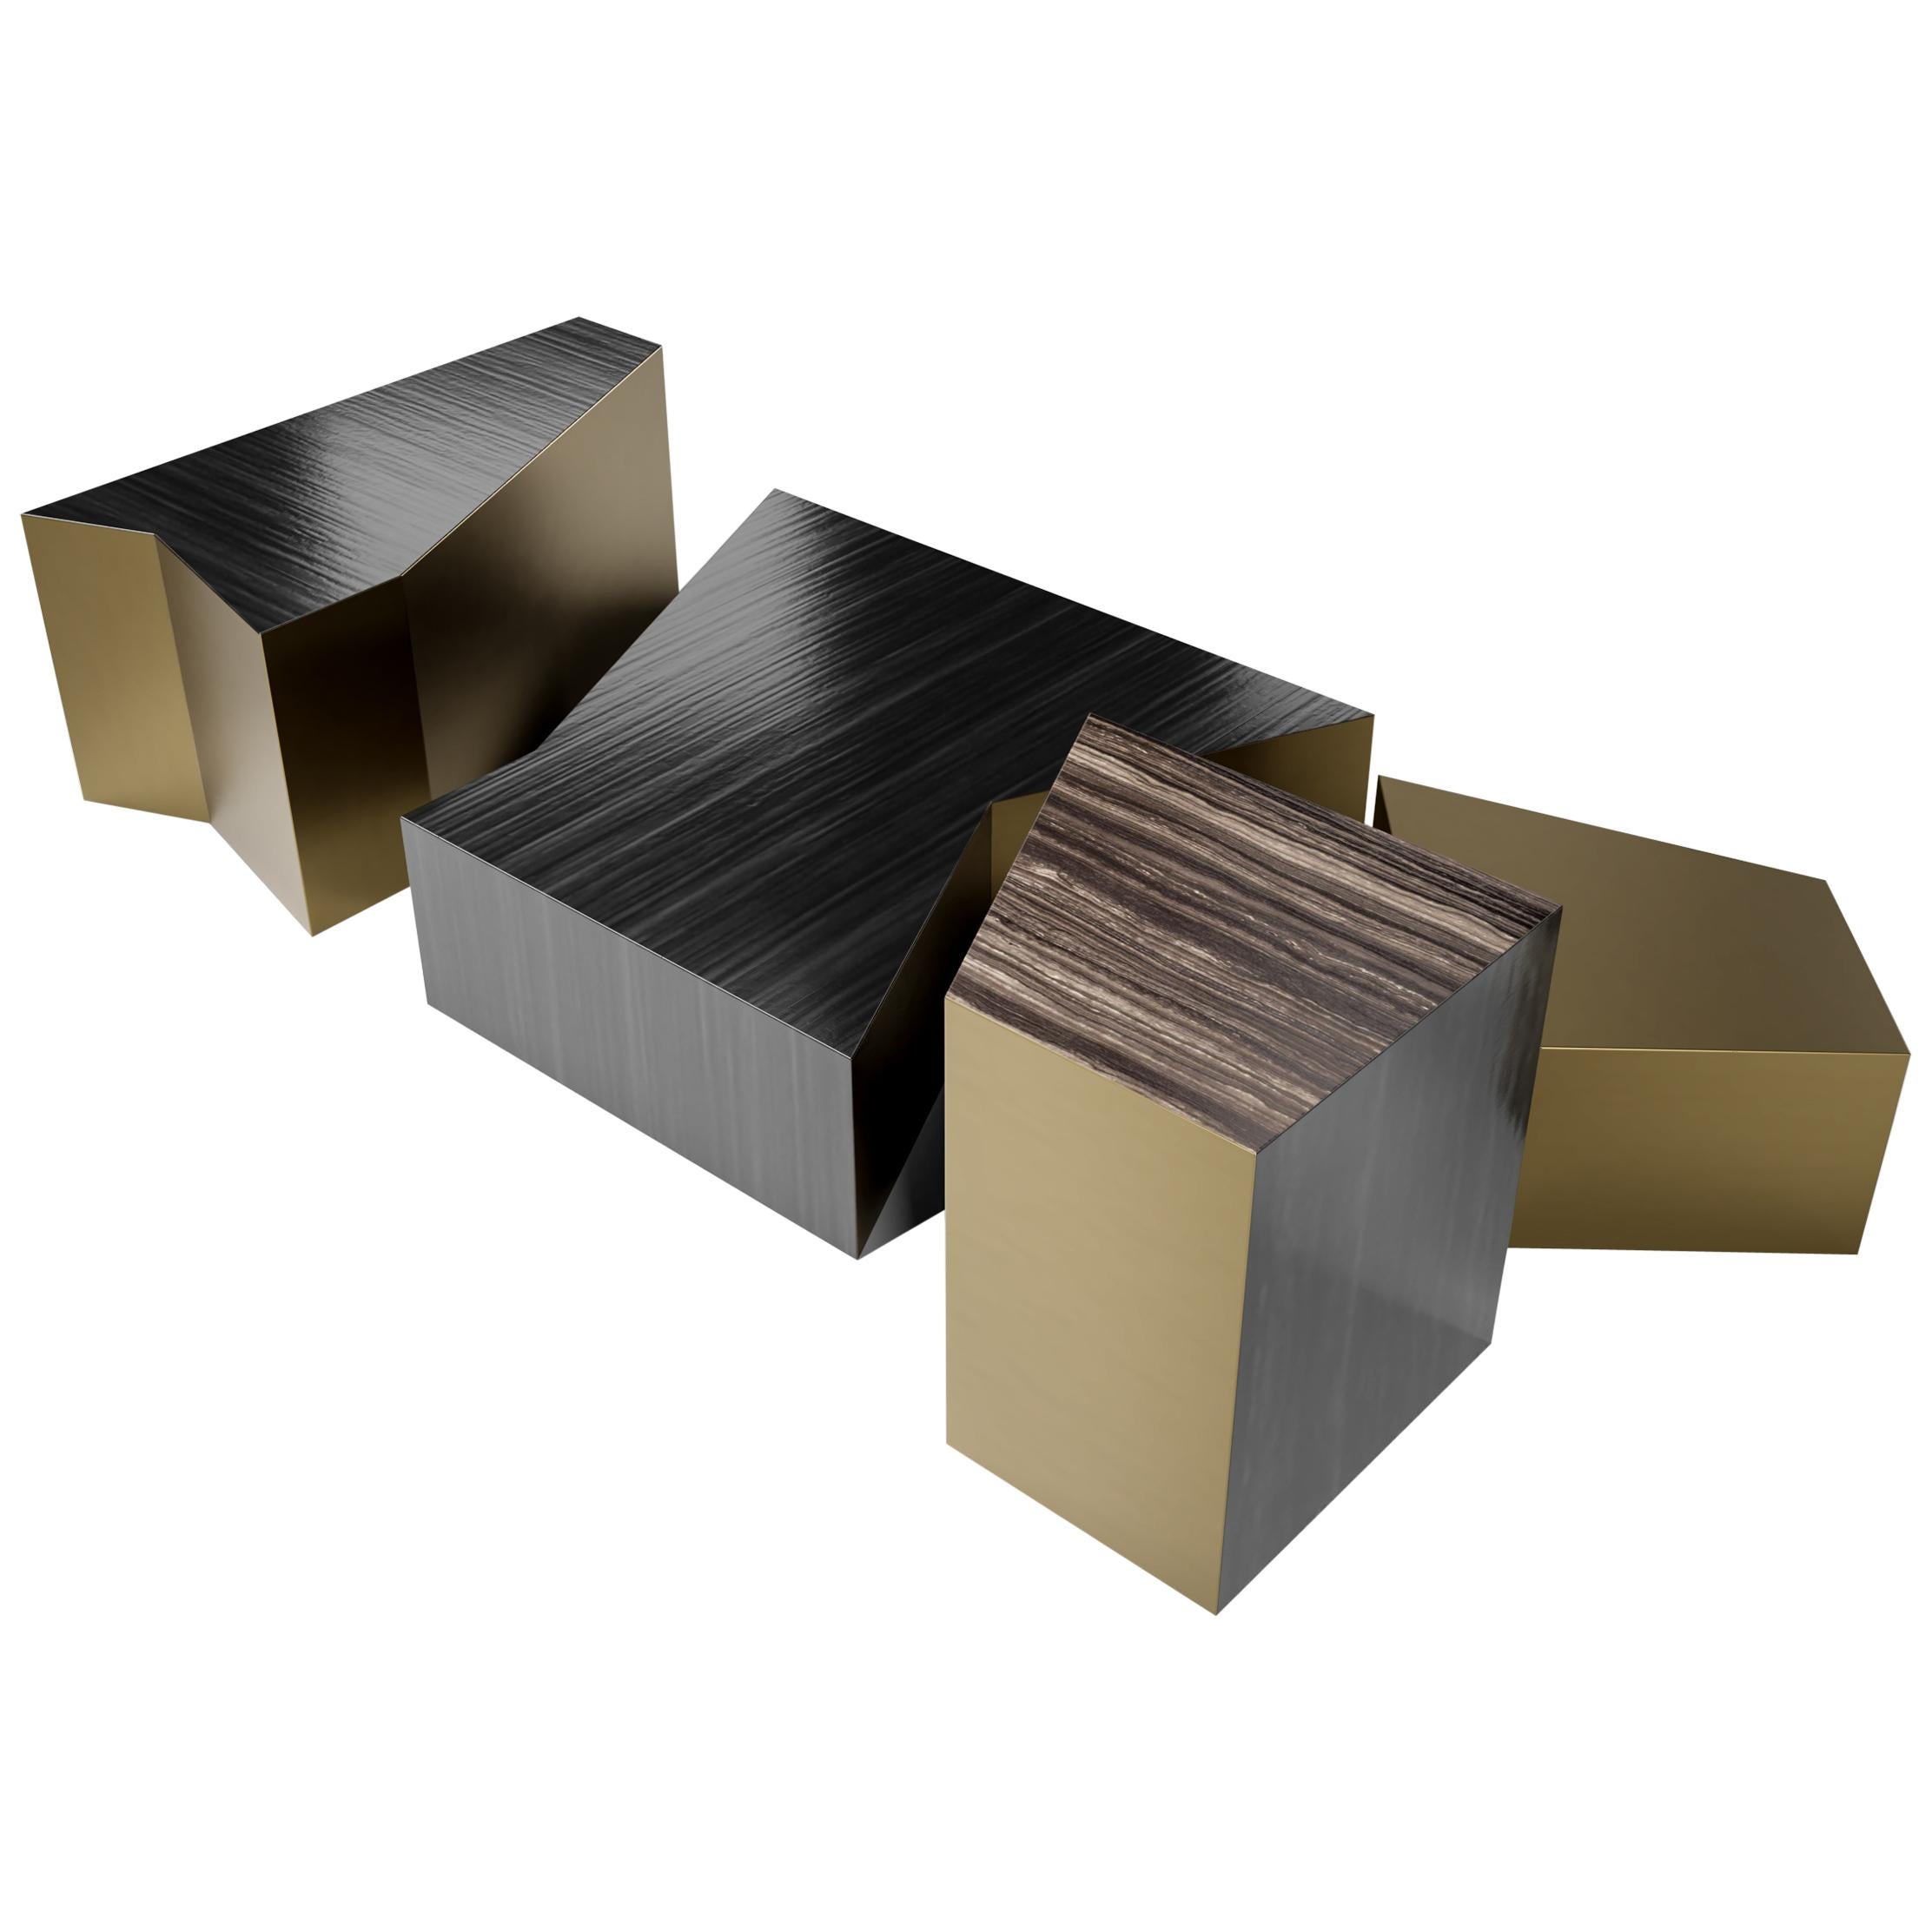 WEDGE COFFEE TABLE -  4 Pieced Modern Design with Tobacco Marble Top